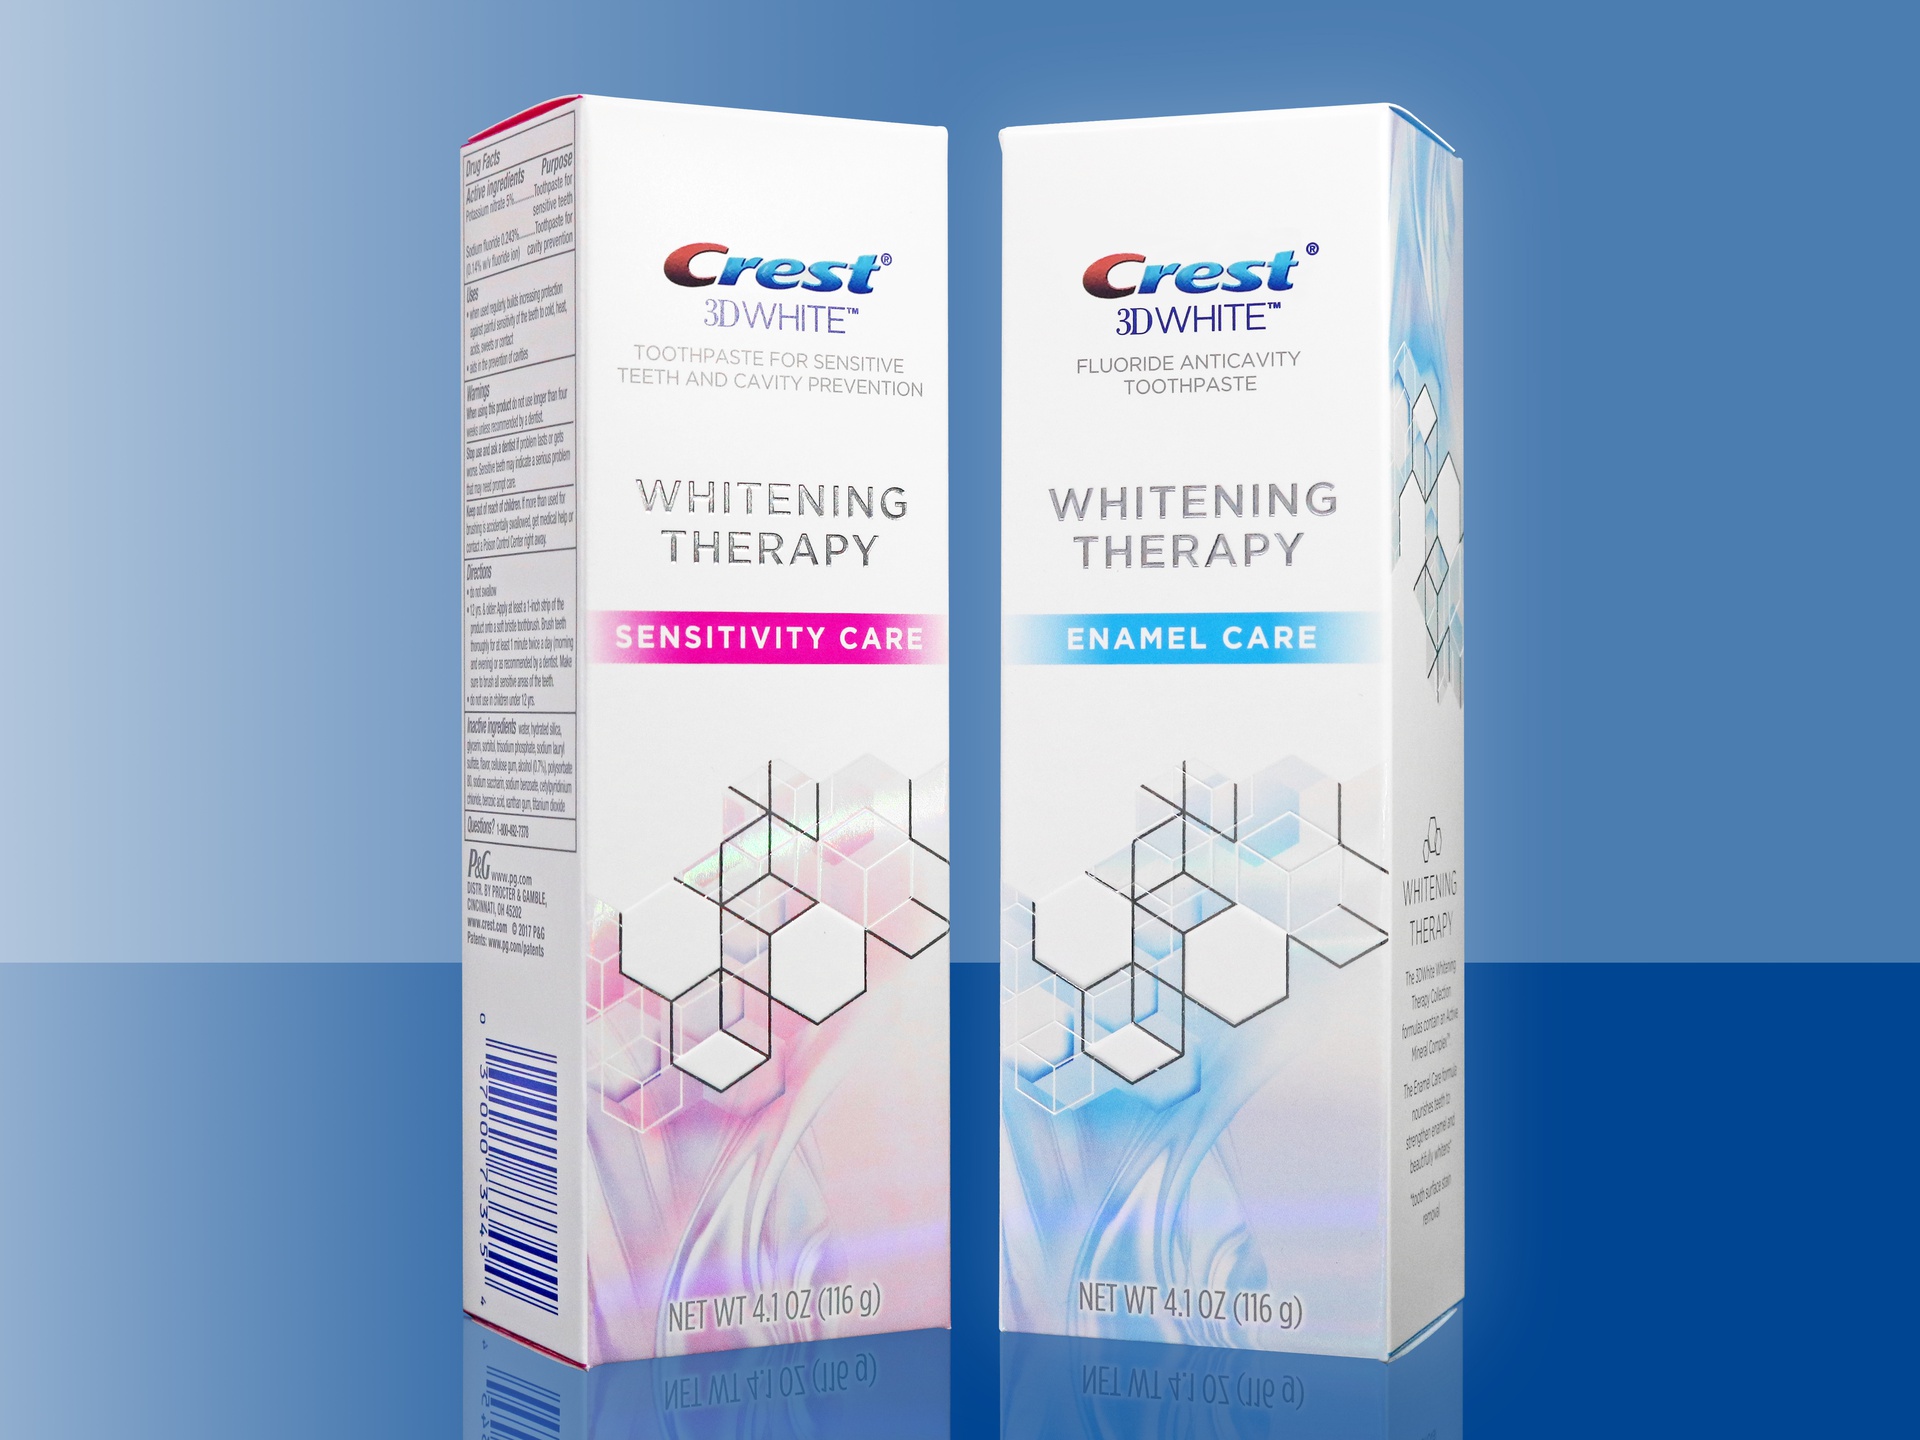 Crest 3D White Whitening Therapy packaging